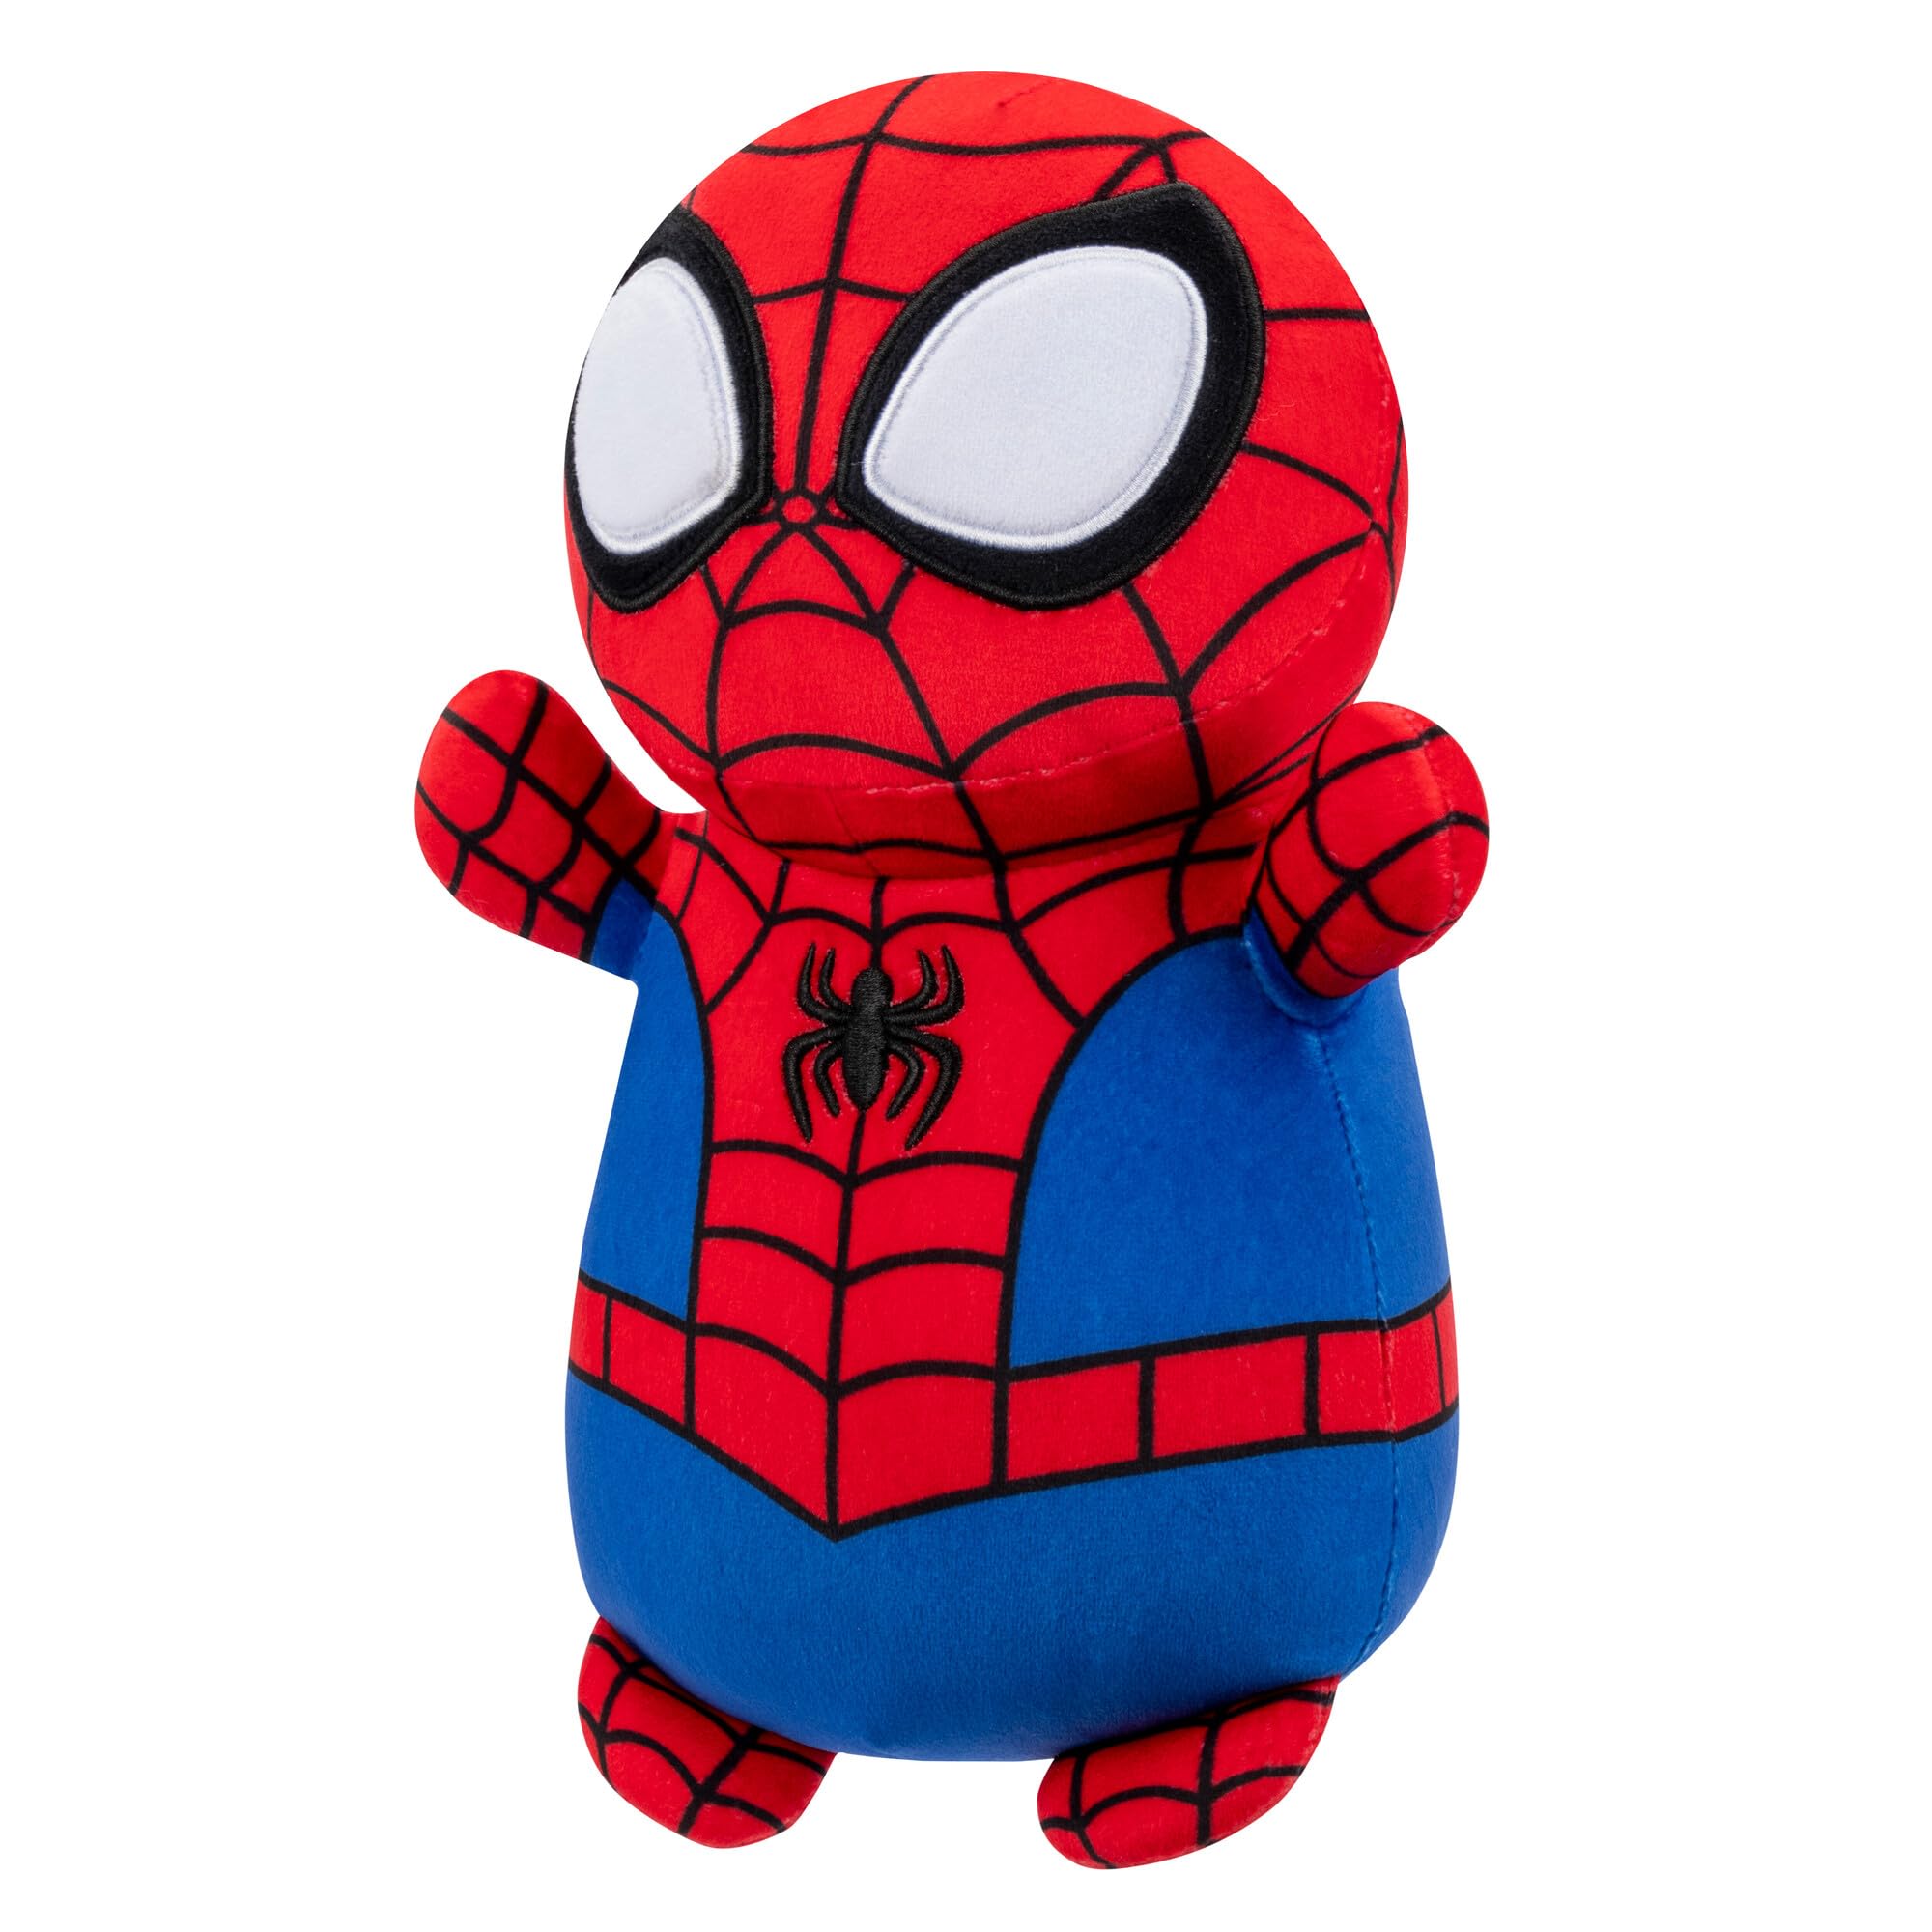 Squishmallows Original Marvel Spidey and His Amazing Friends 10-Inch Spidey HugMees - Medium-Sized Ultrasoft Official Jazwares Plush